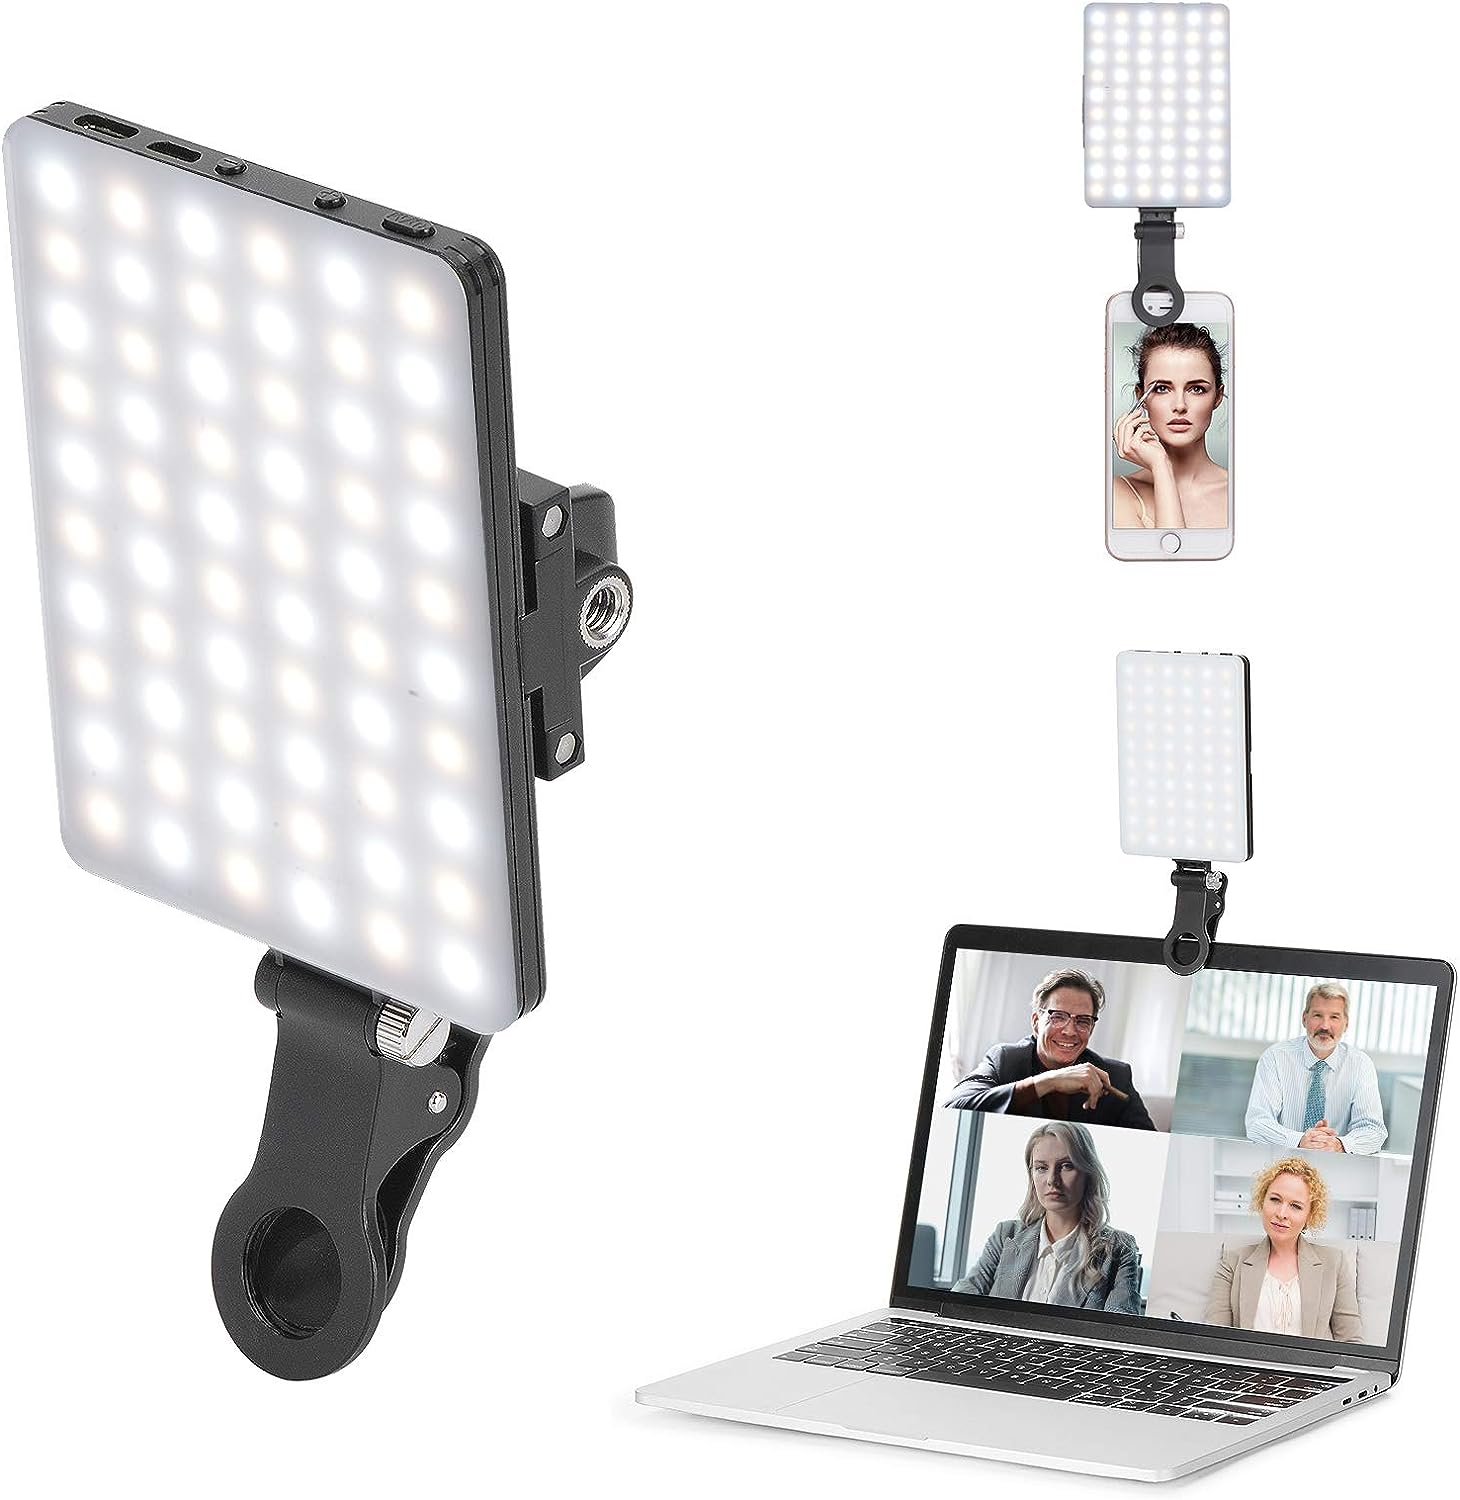 Review of Newmowa 60 LED High Power Rechargeable Clip Fill Video Conference Light